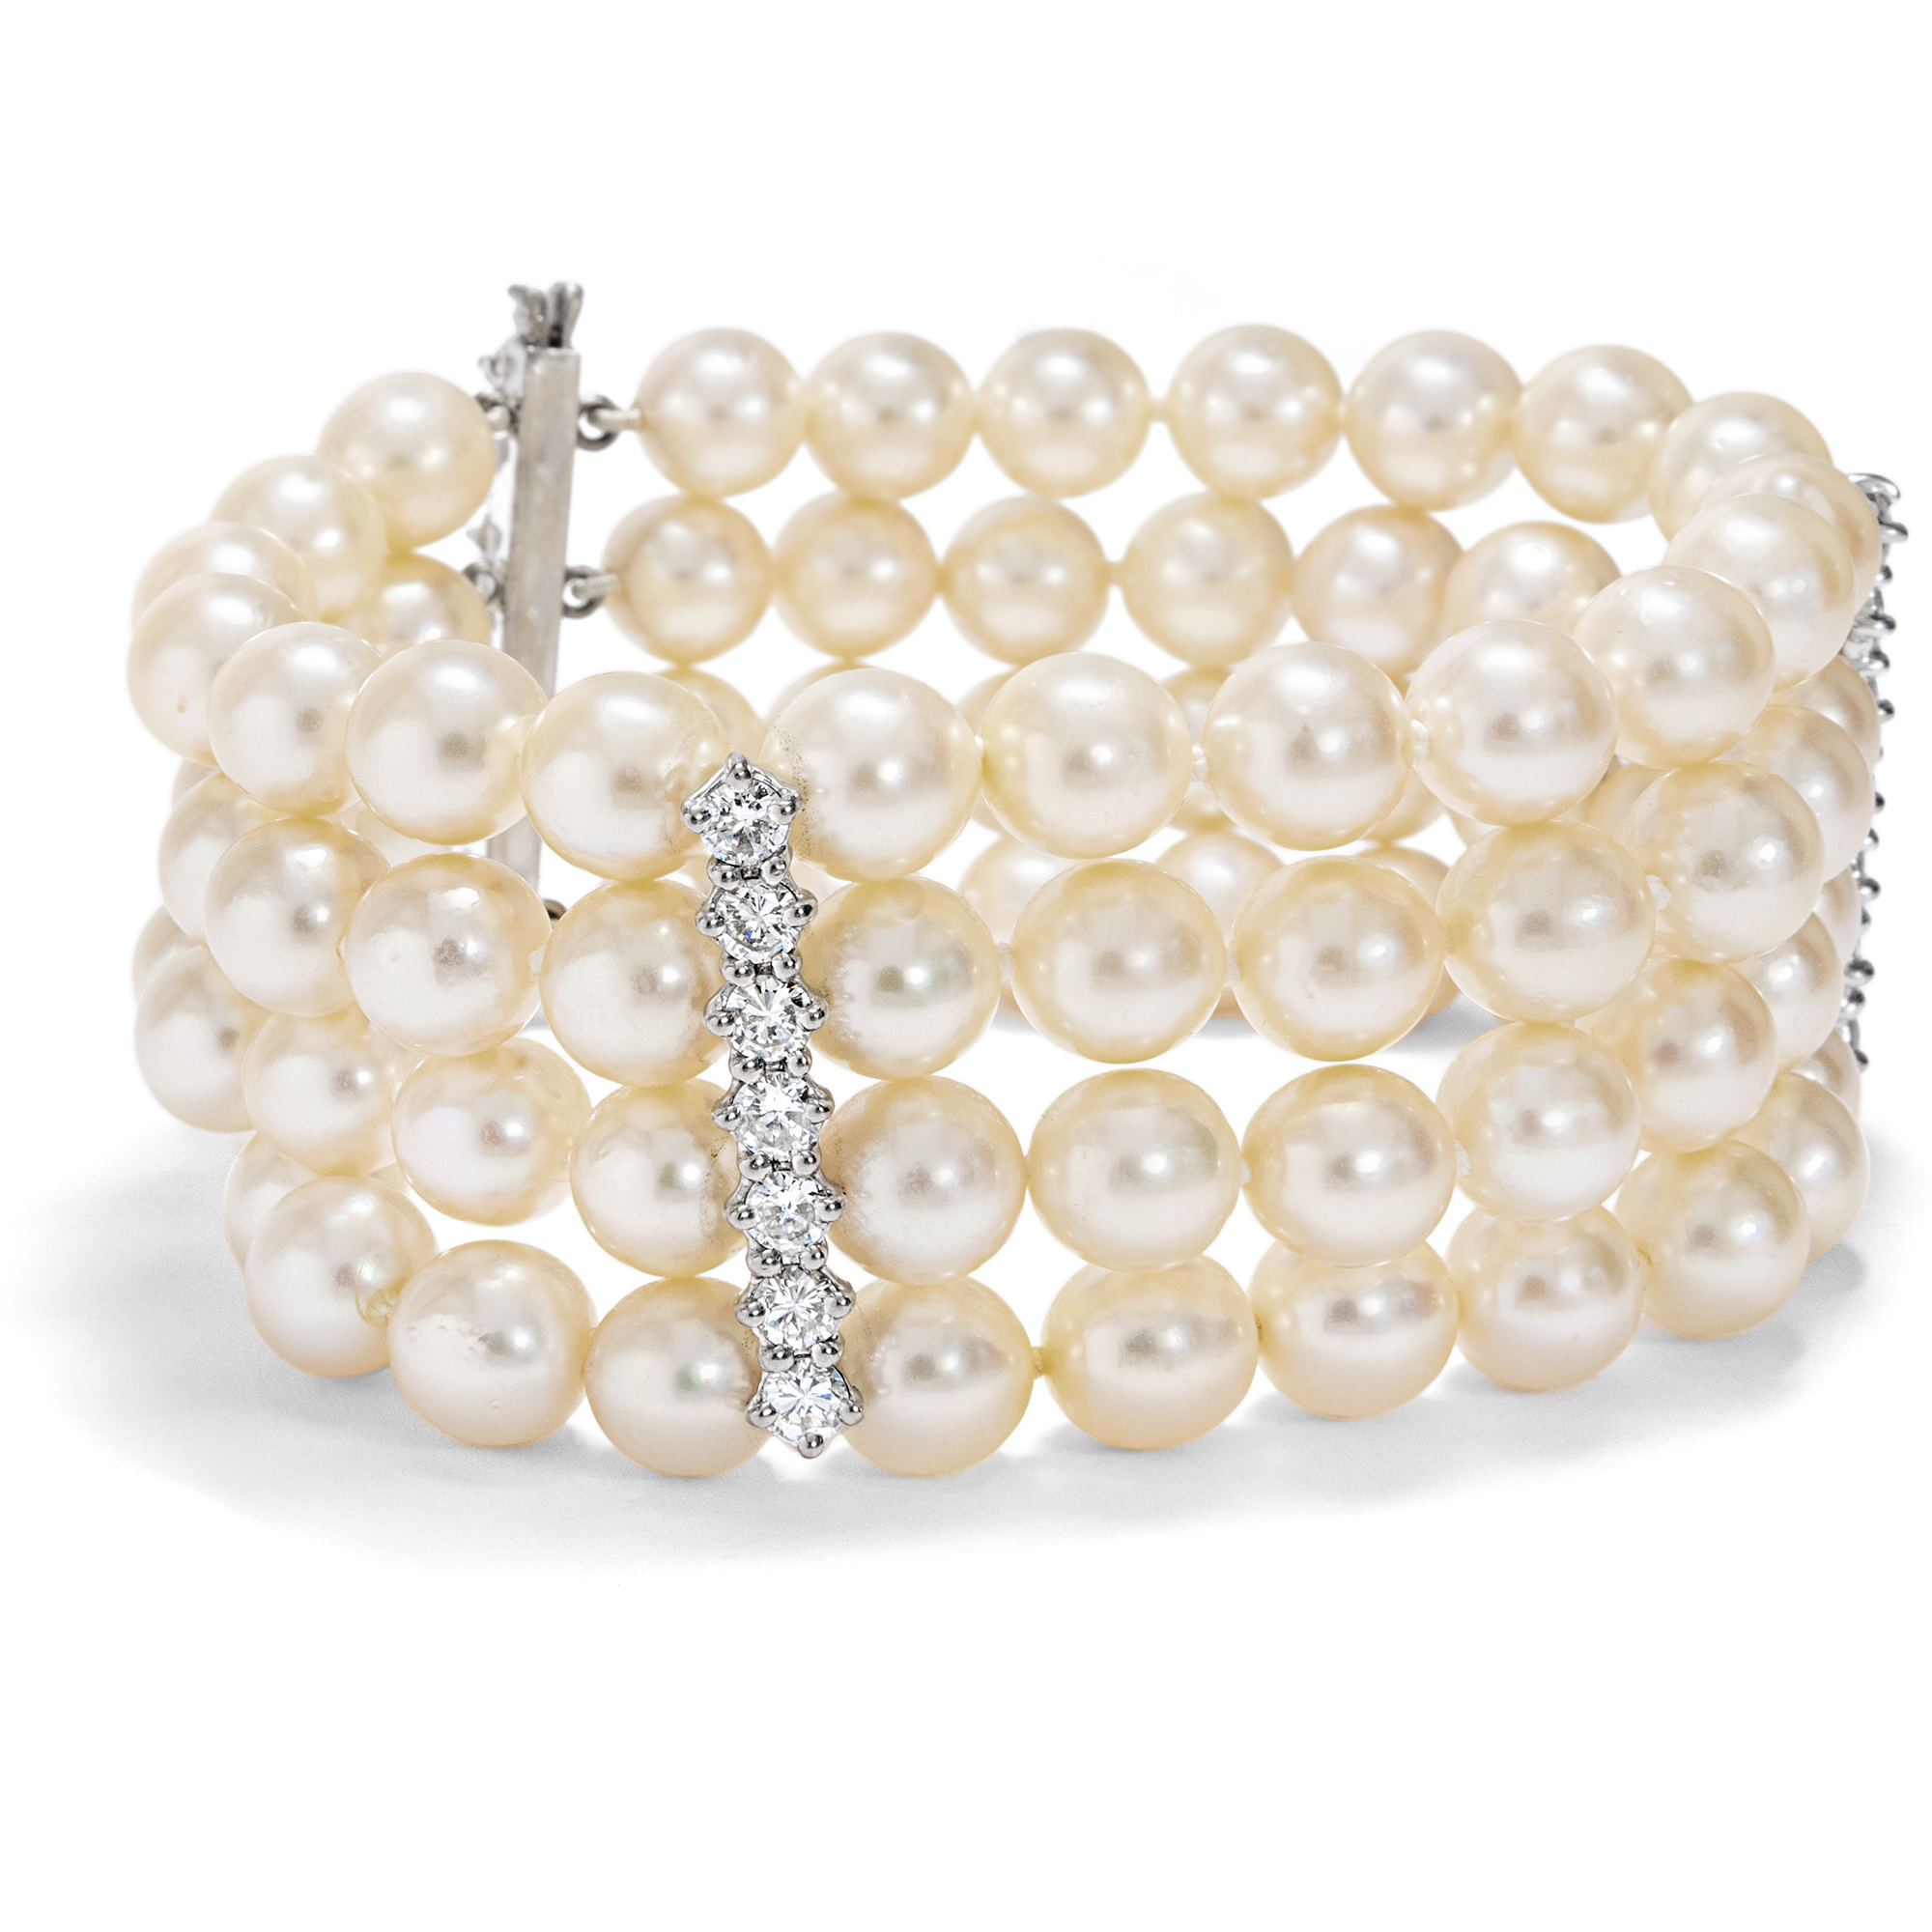 Magnificent Vintage Bracelet in Four Rows of Pearls & Diamonds, ca. 1970